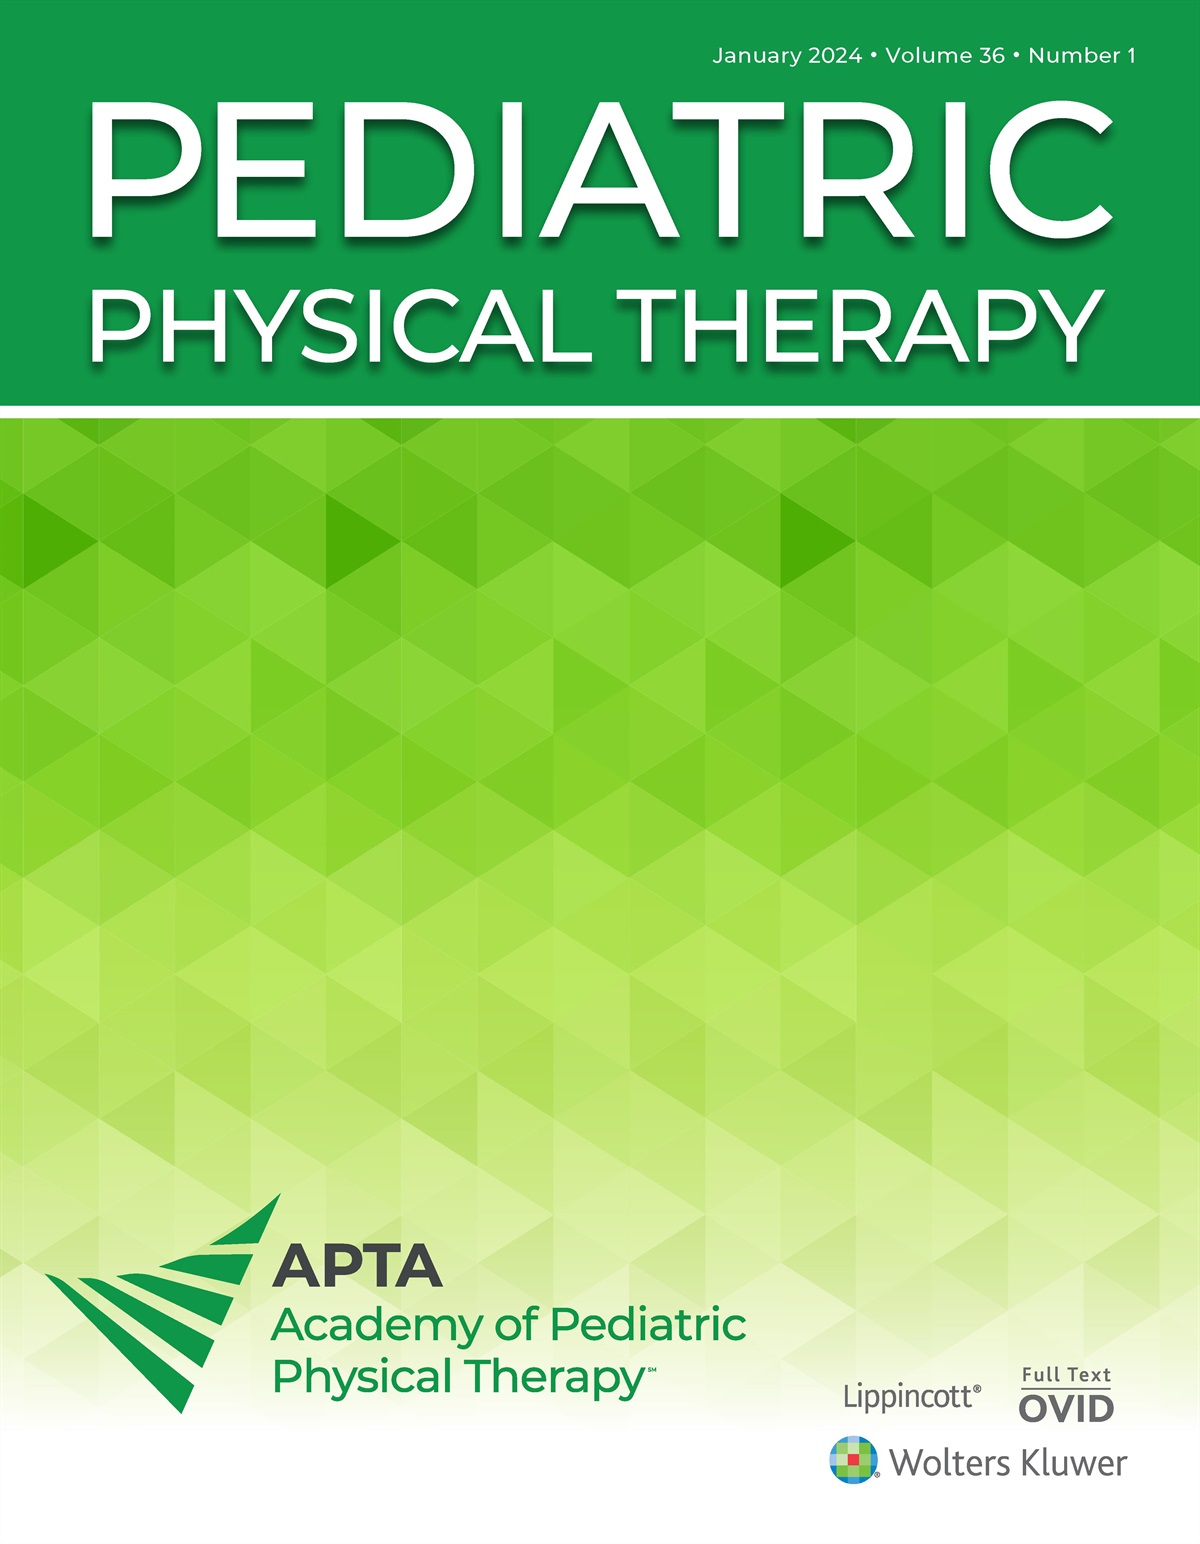 Commentary on “Child and Caregiver Beliefs of Importance of Physical Function and Quality of Life in Juvenile Idiopathic Arthritis: A Survey Study”